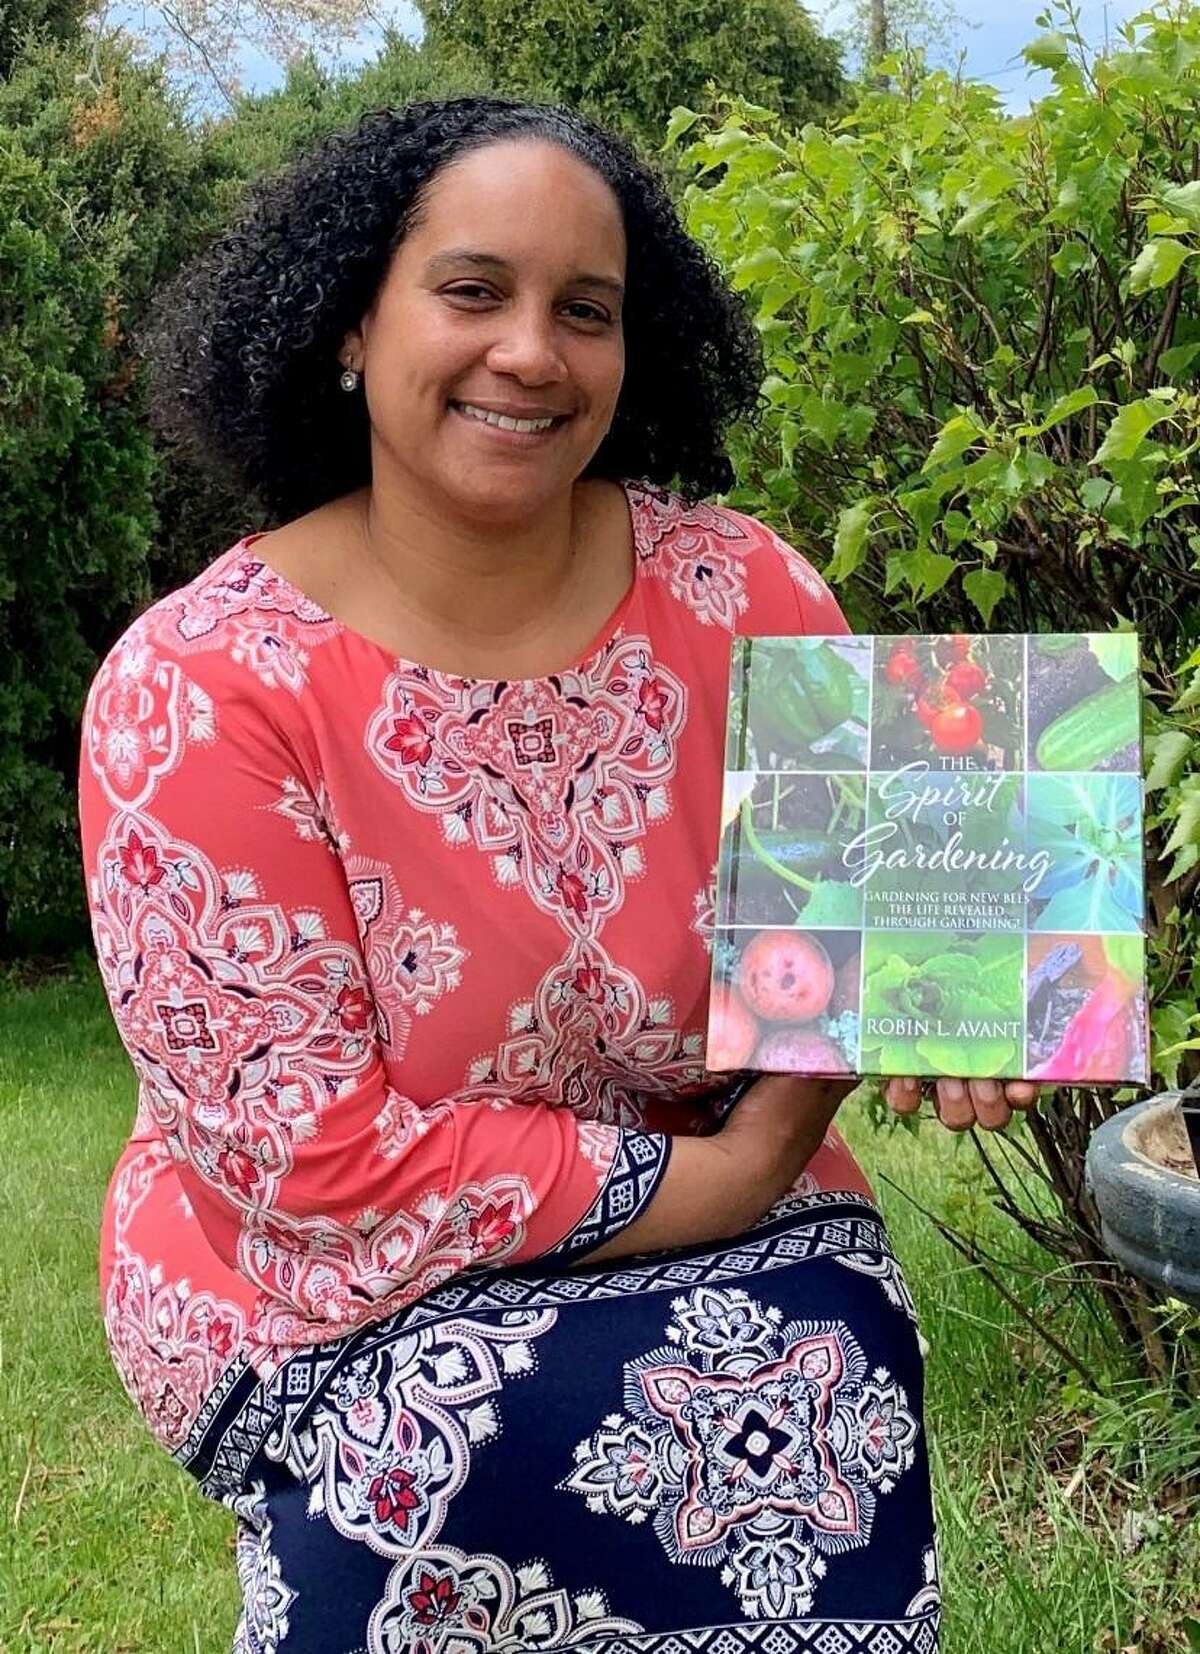 As many people turn to gardening as a way to occupy themselves during quarantine, HCC Dean of Academic Affairs Robin L. Avant has published a book about how to get started on the process.